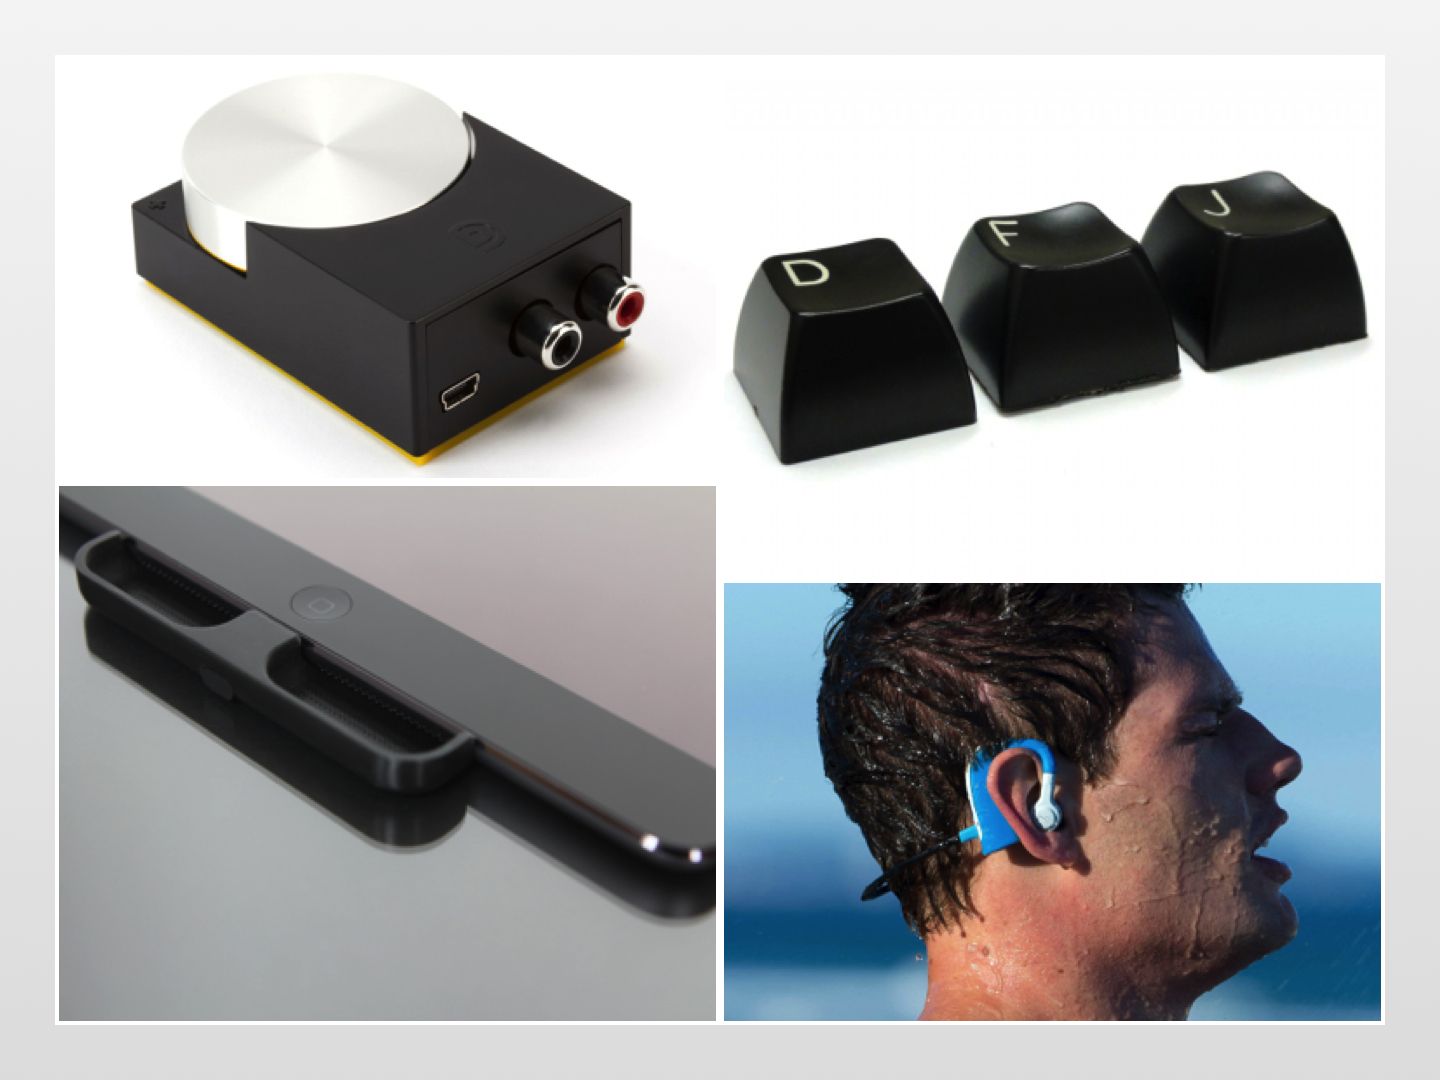 Whether the weather is wet or dry, we've got you covered this week. Waterproof headphones and speakers, and some nonslip bike pedal covers, will let you carry on in the rain or in the lake. And a flash-booster, replacement keycaps and a big twisty knob will keep you entertained indoors. Don’t forget your umbrella (or sunglasses)!